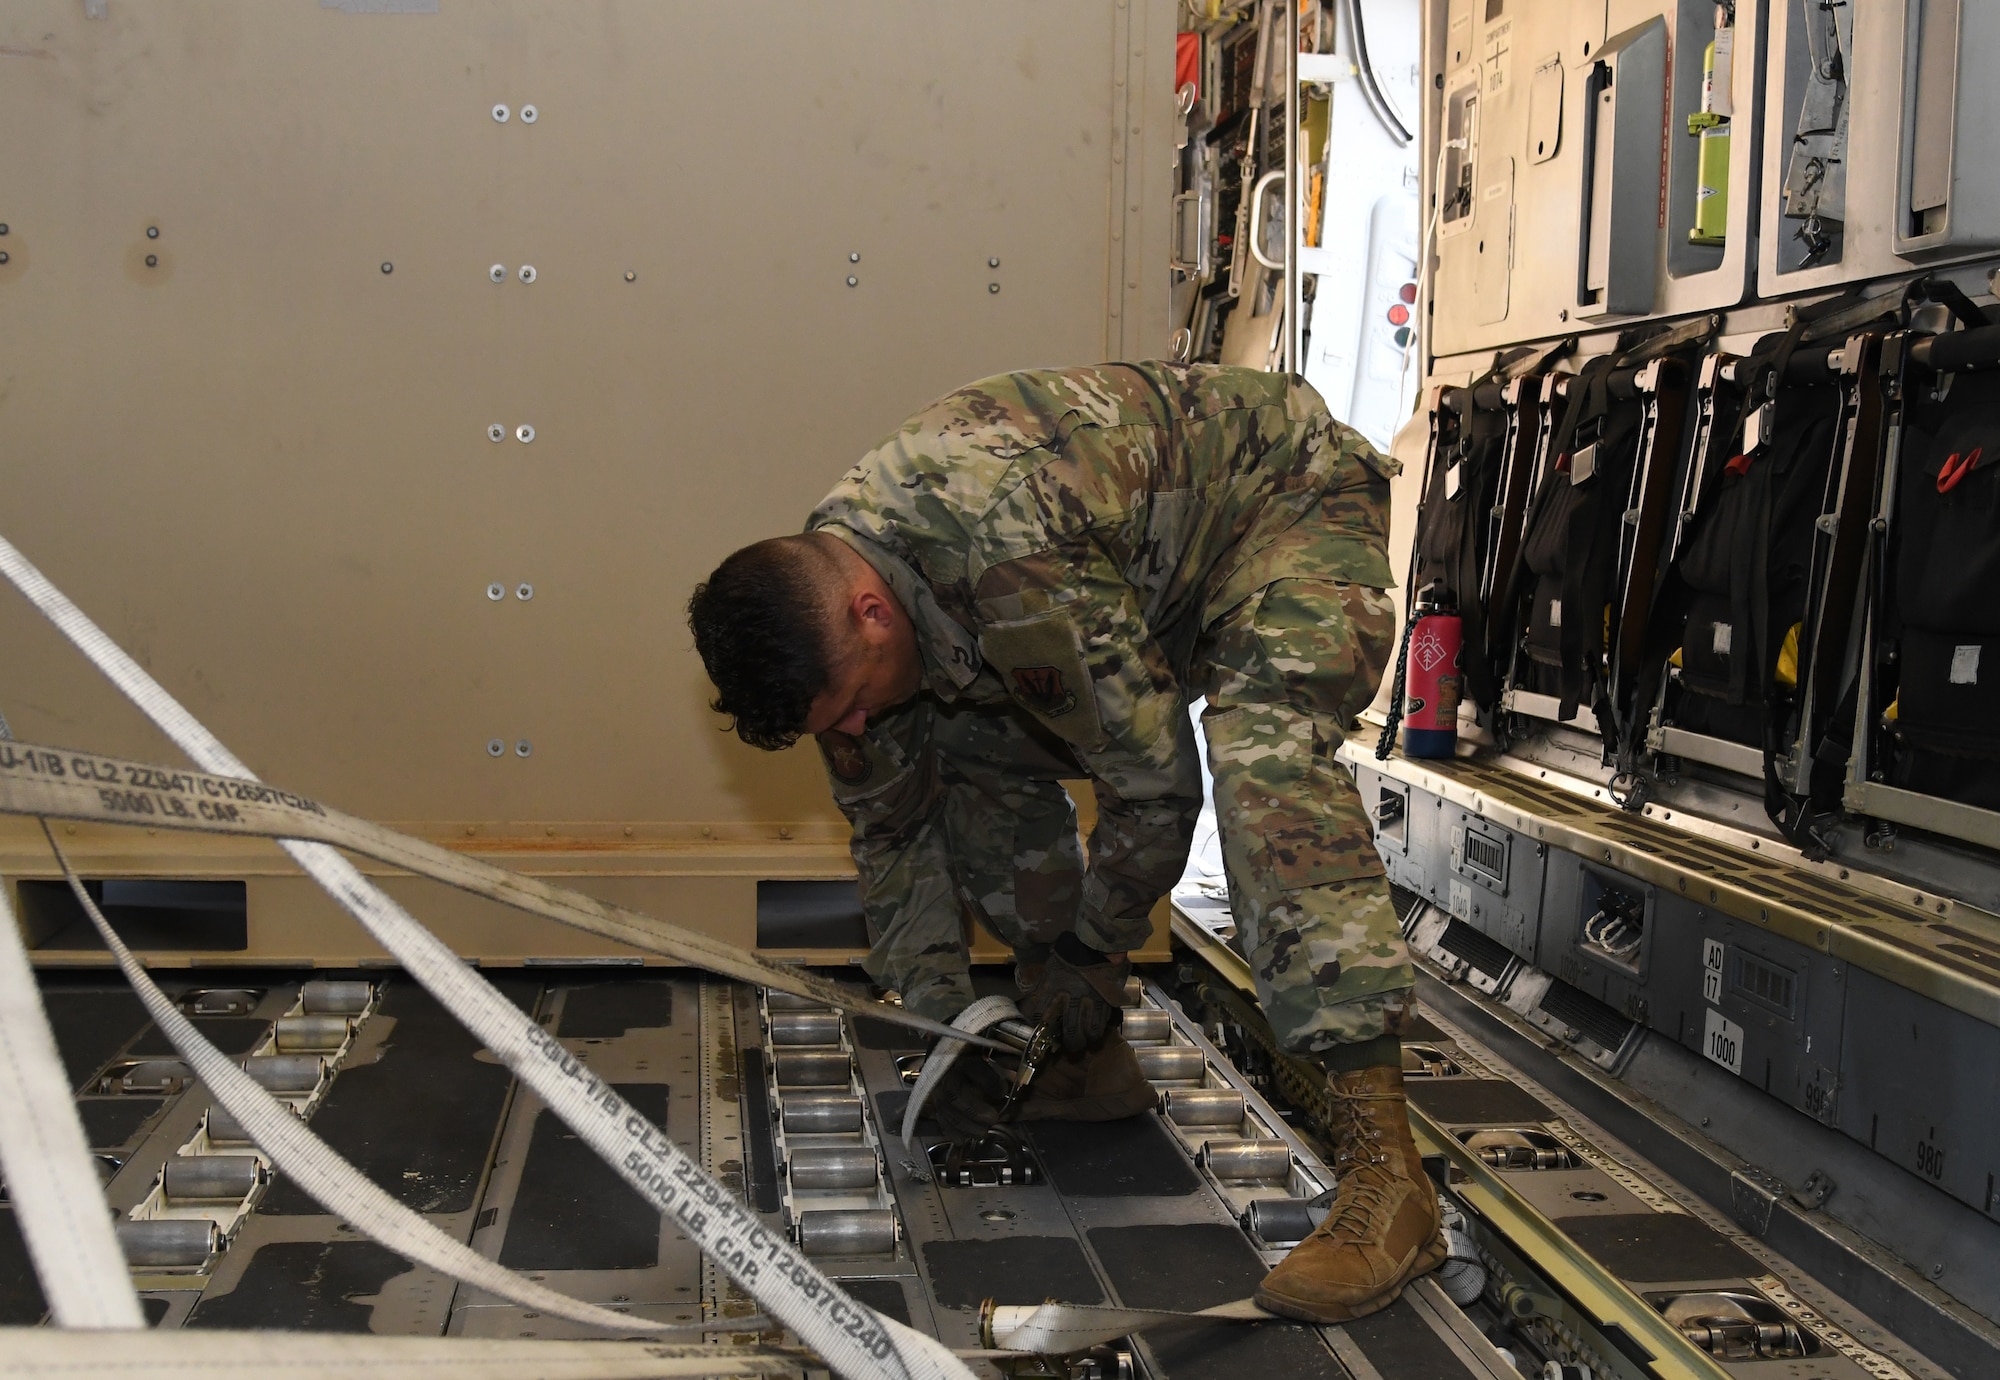 An Airman unhooks cargo from the floor of a plane.